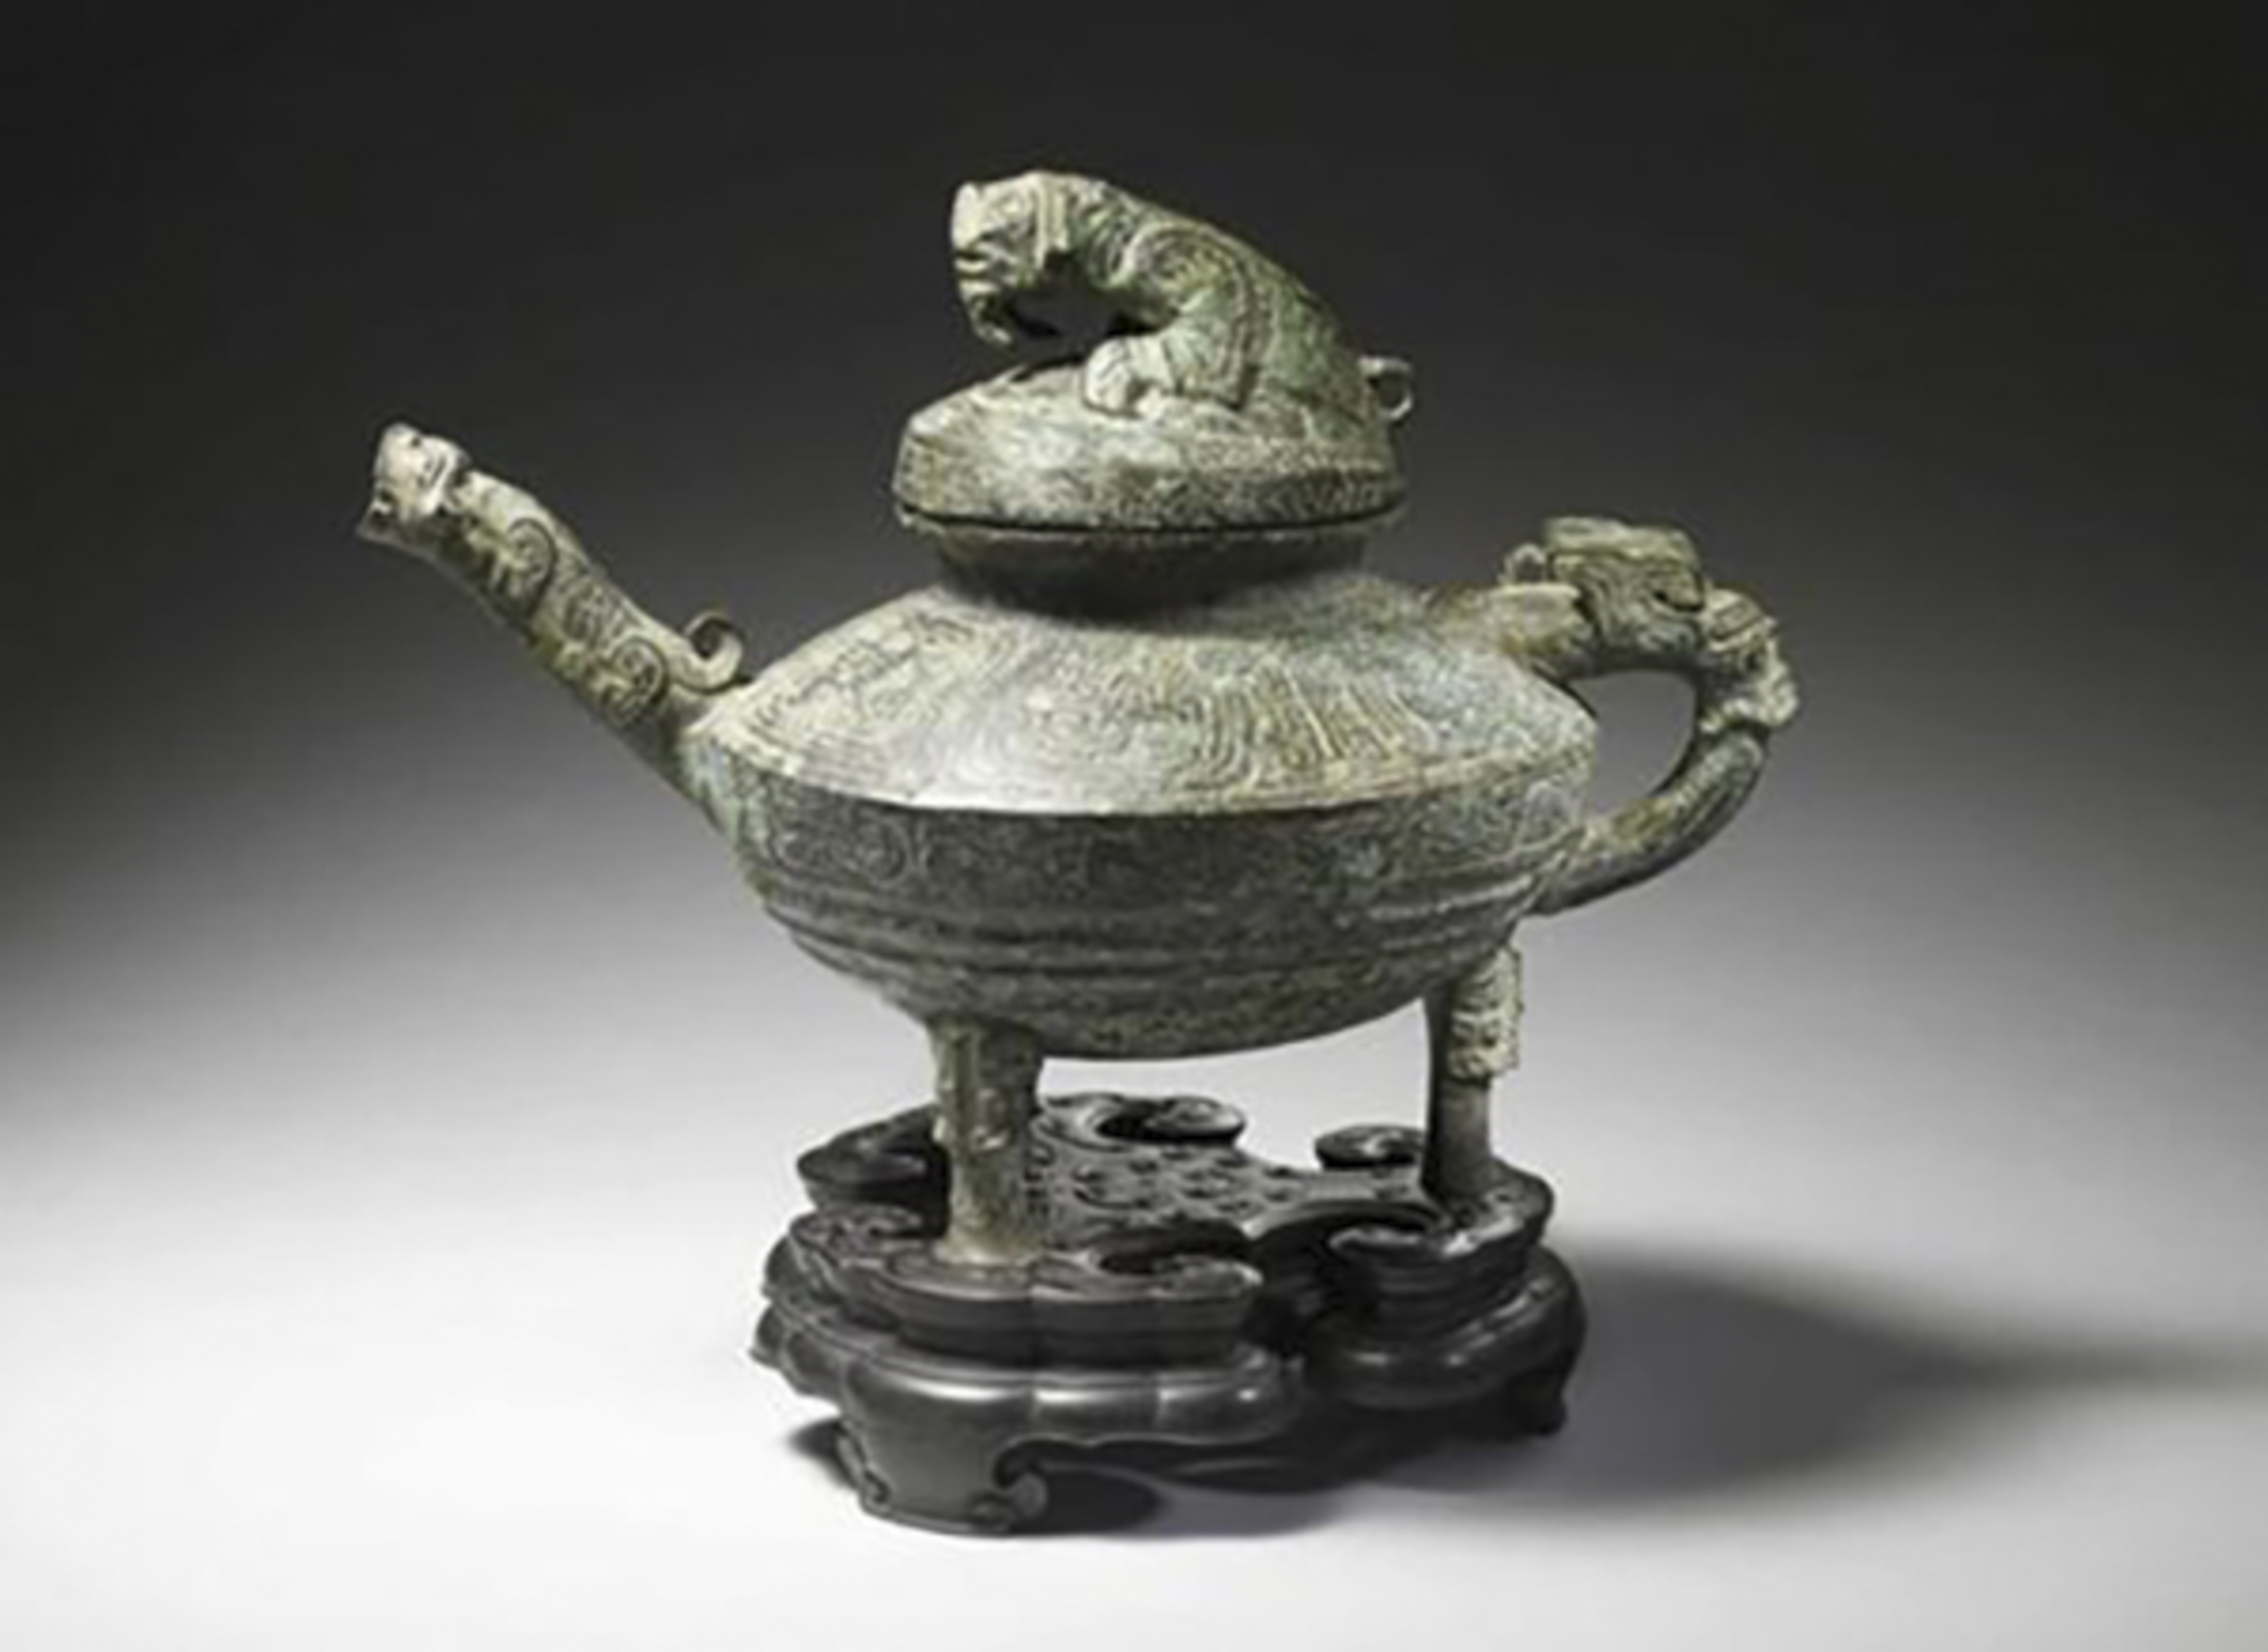 The 3,000-year-old bronze water vessel is to be auctioned in Britain next month. Photo: Thepaper.cn